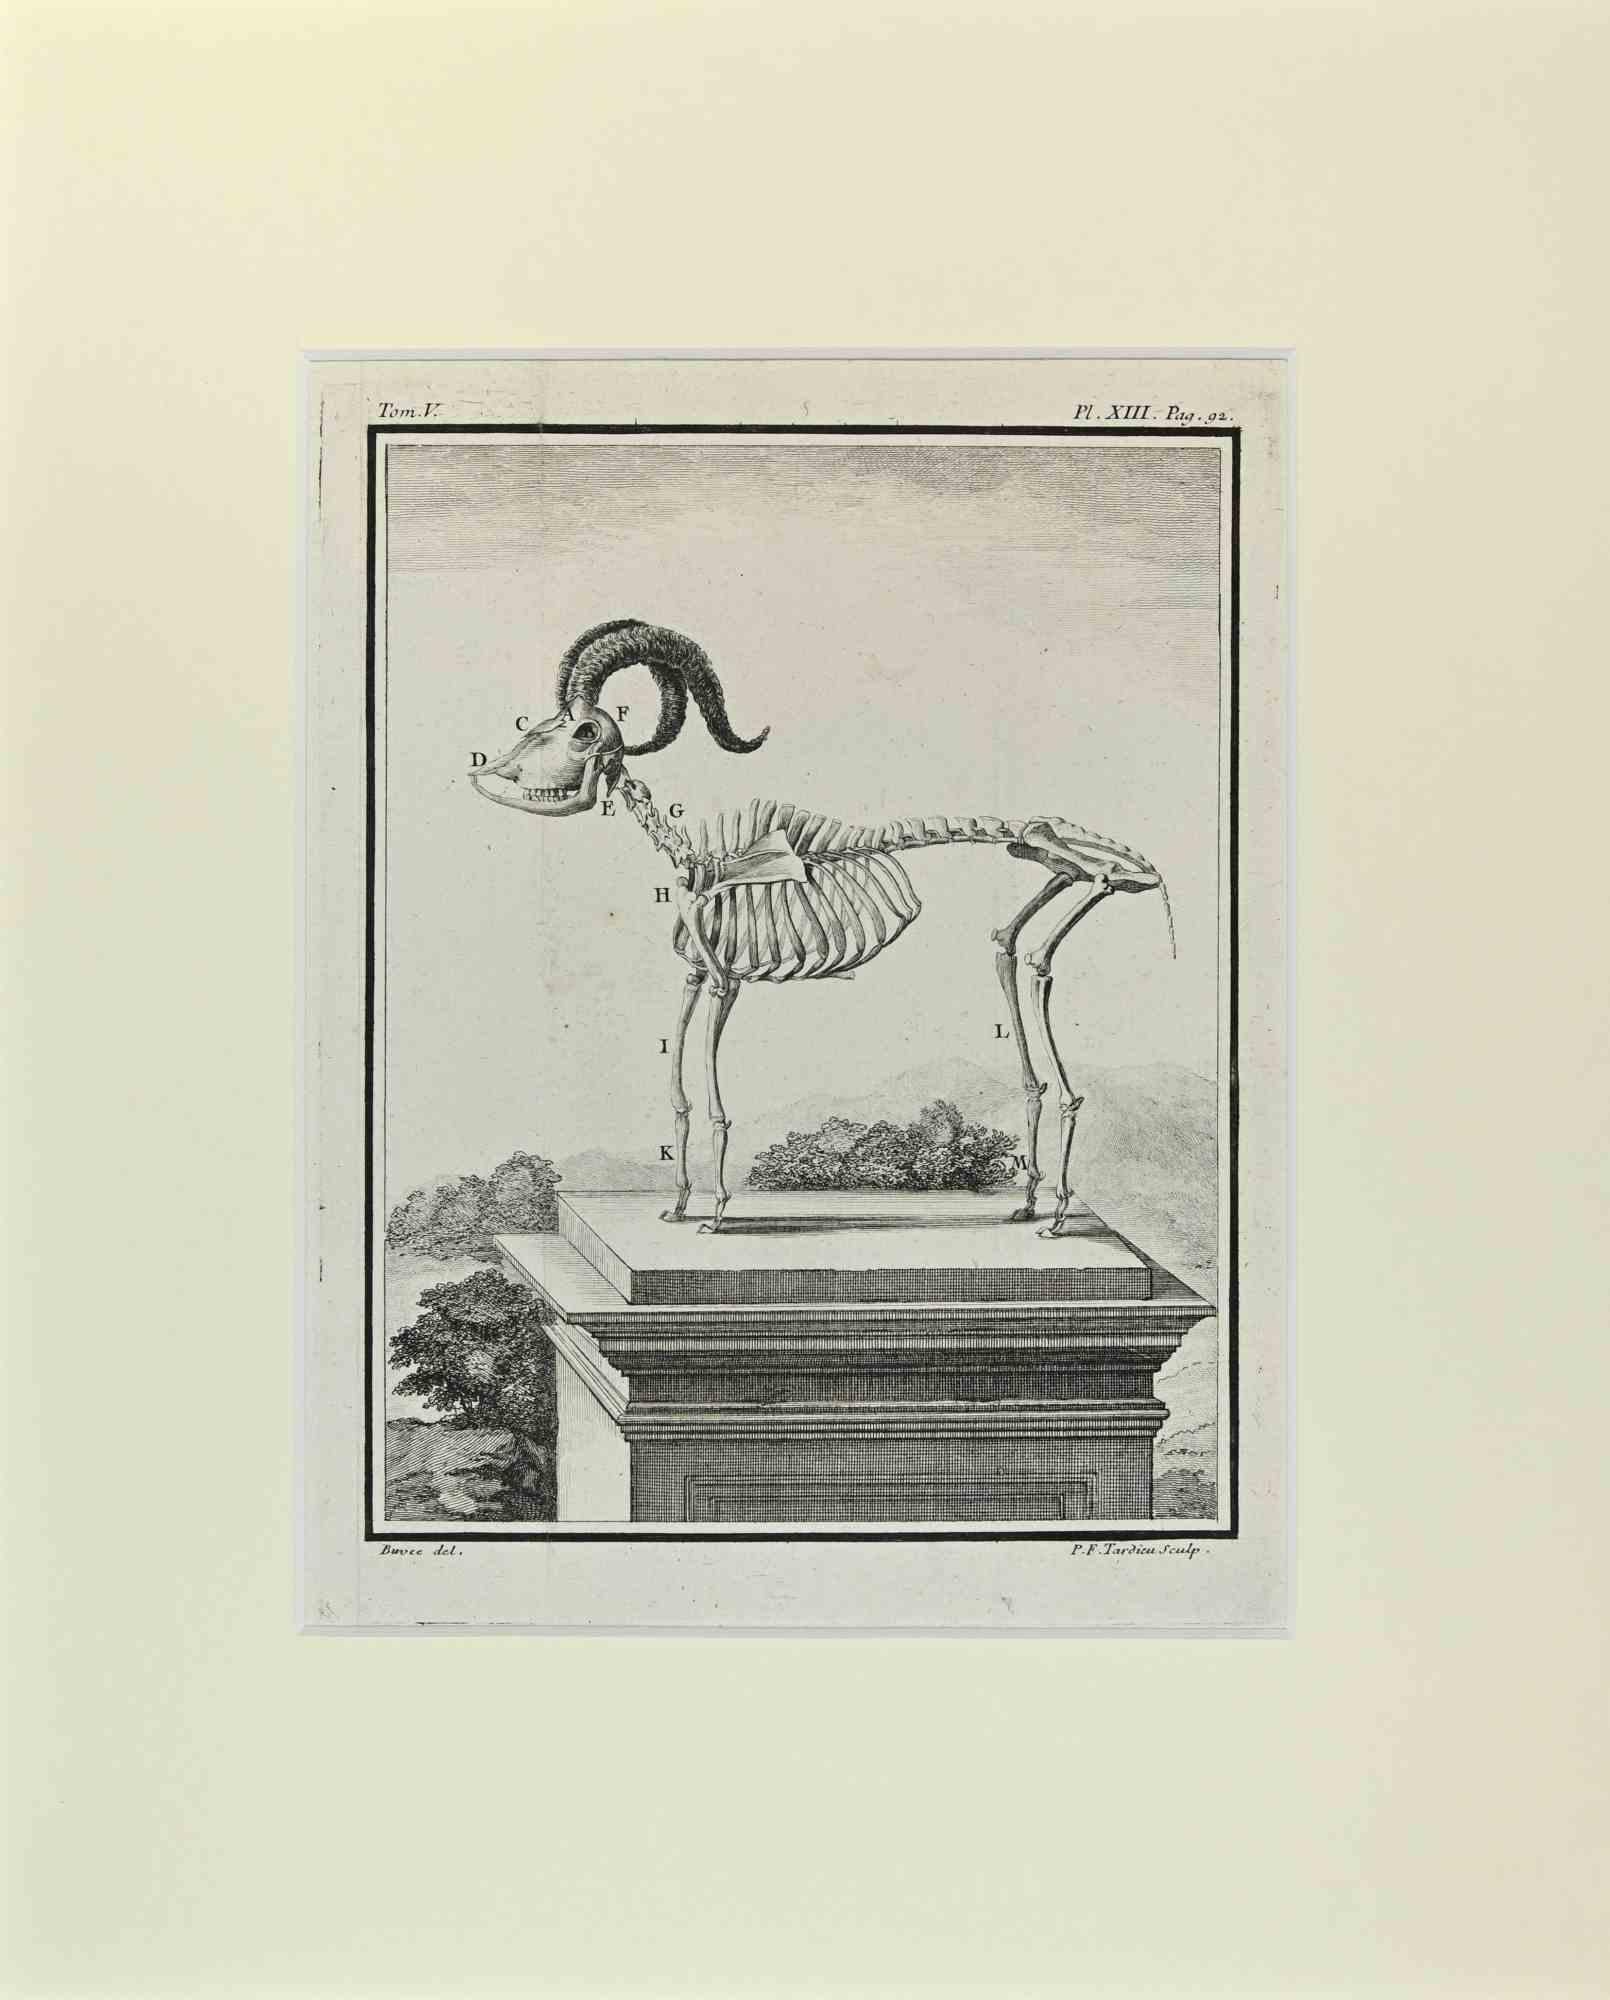 Mouflon Wild Sheep  is an artwork realized  by  Buvée l'Américain in 1771.  

Etching B./W. print  on ivory paper. Signed on  plate on the lower left margin.

The work is glued on cardboard. Total dimensions: 35x28 cm.

The artwork belongs to the